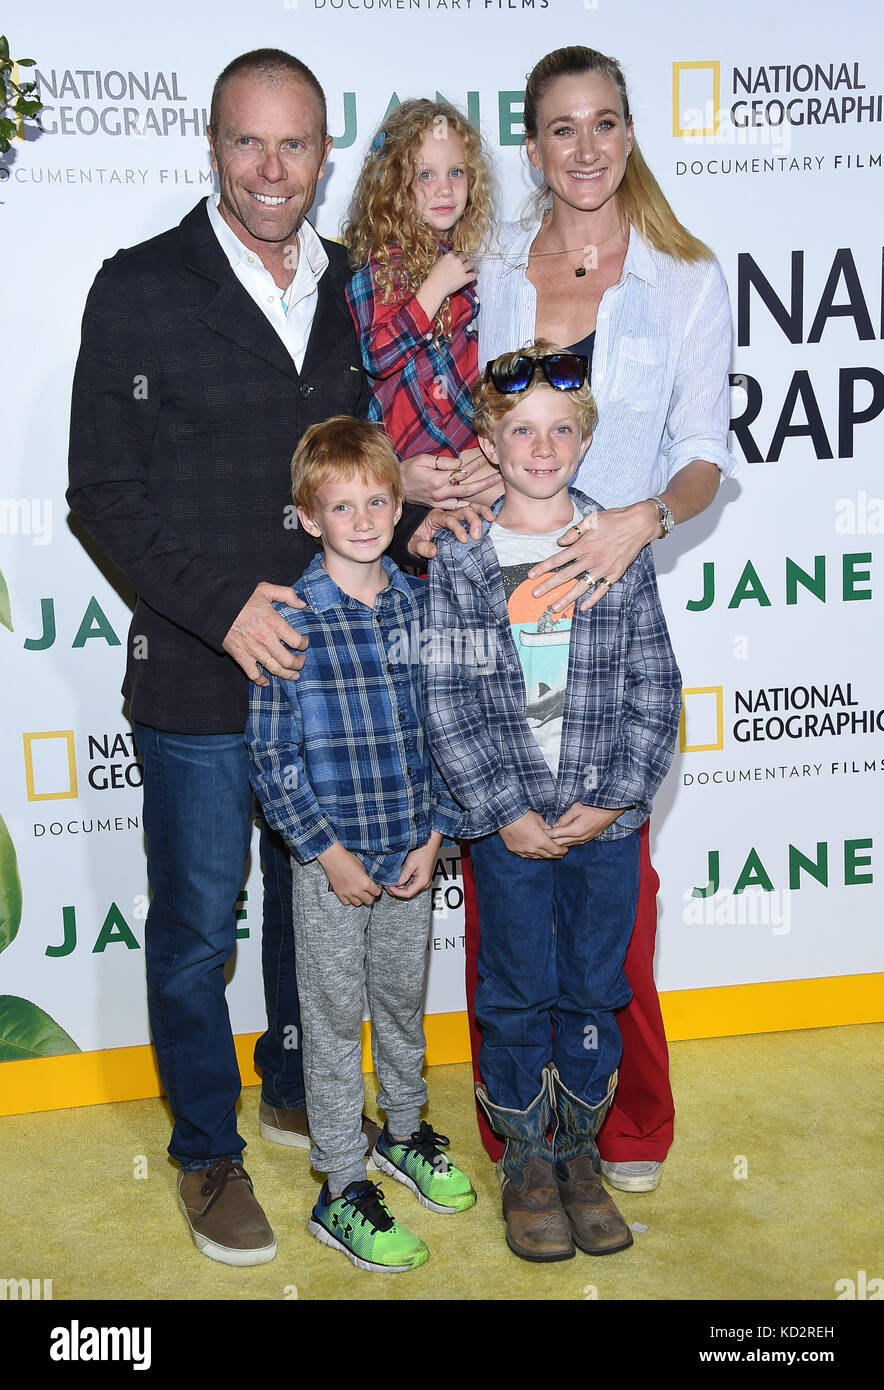 Hollywood, California, USA. 9th Oct, 2017. Kerri Walsh Jennings, Casey Jennings, Joseph Jennings, Sundance Jennings and Scout Jennings arrives for the premiere of the film 'Jane' at the Hollywood Bowl. Credit: Lisa O'Connor/ZUMA Wire/Alamy Live News Stock Photo